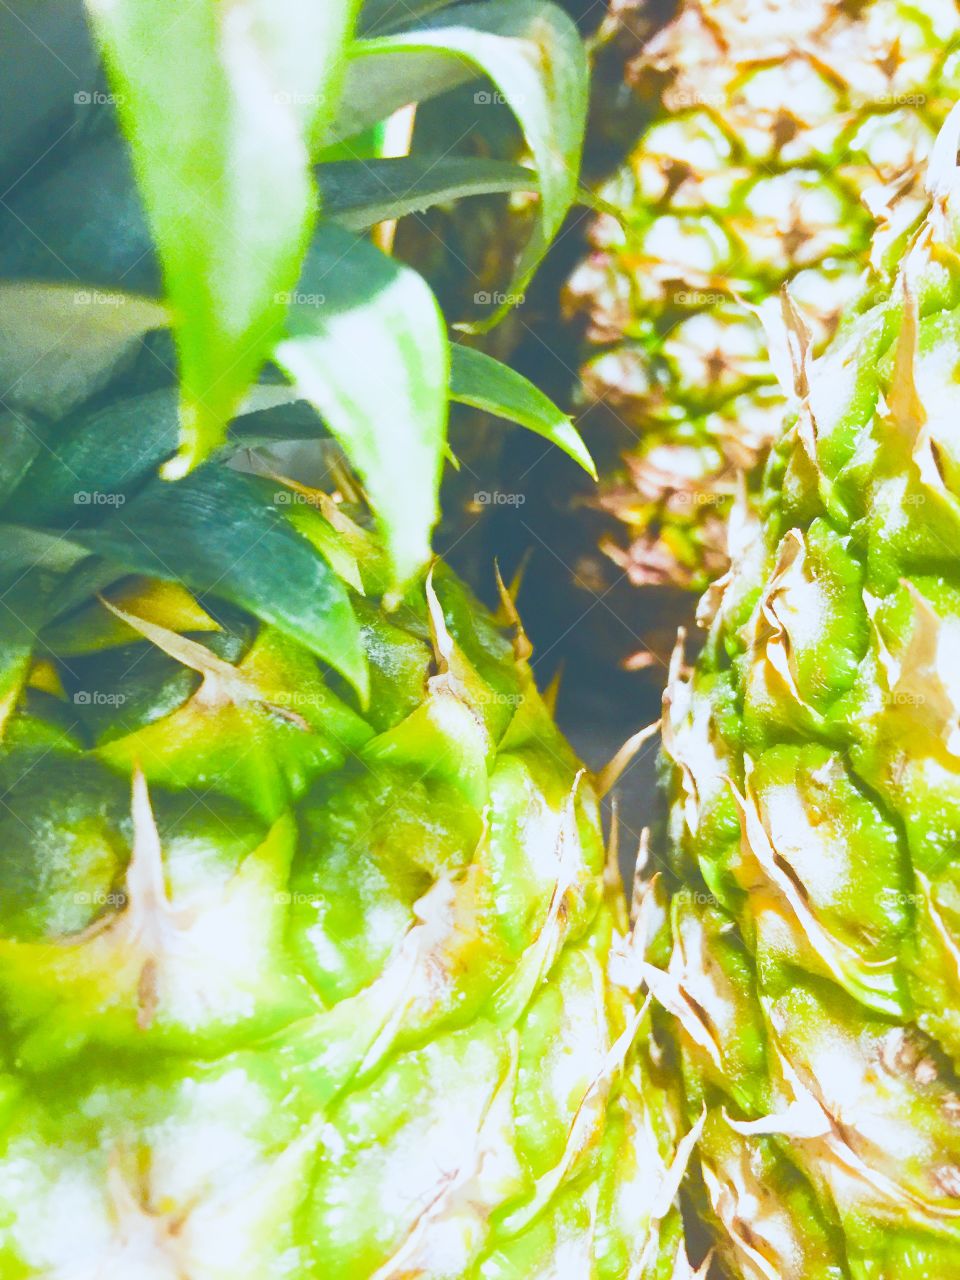 Grocery store pineapples, how authentic.